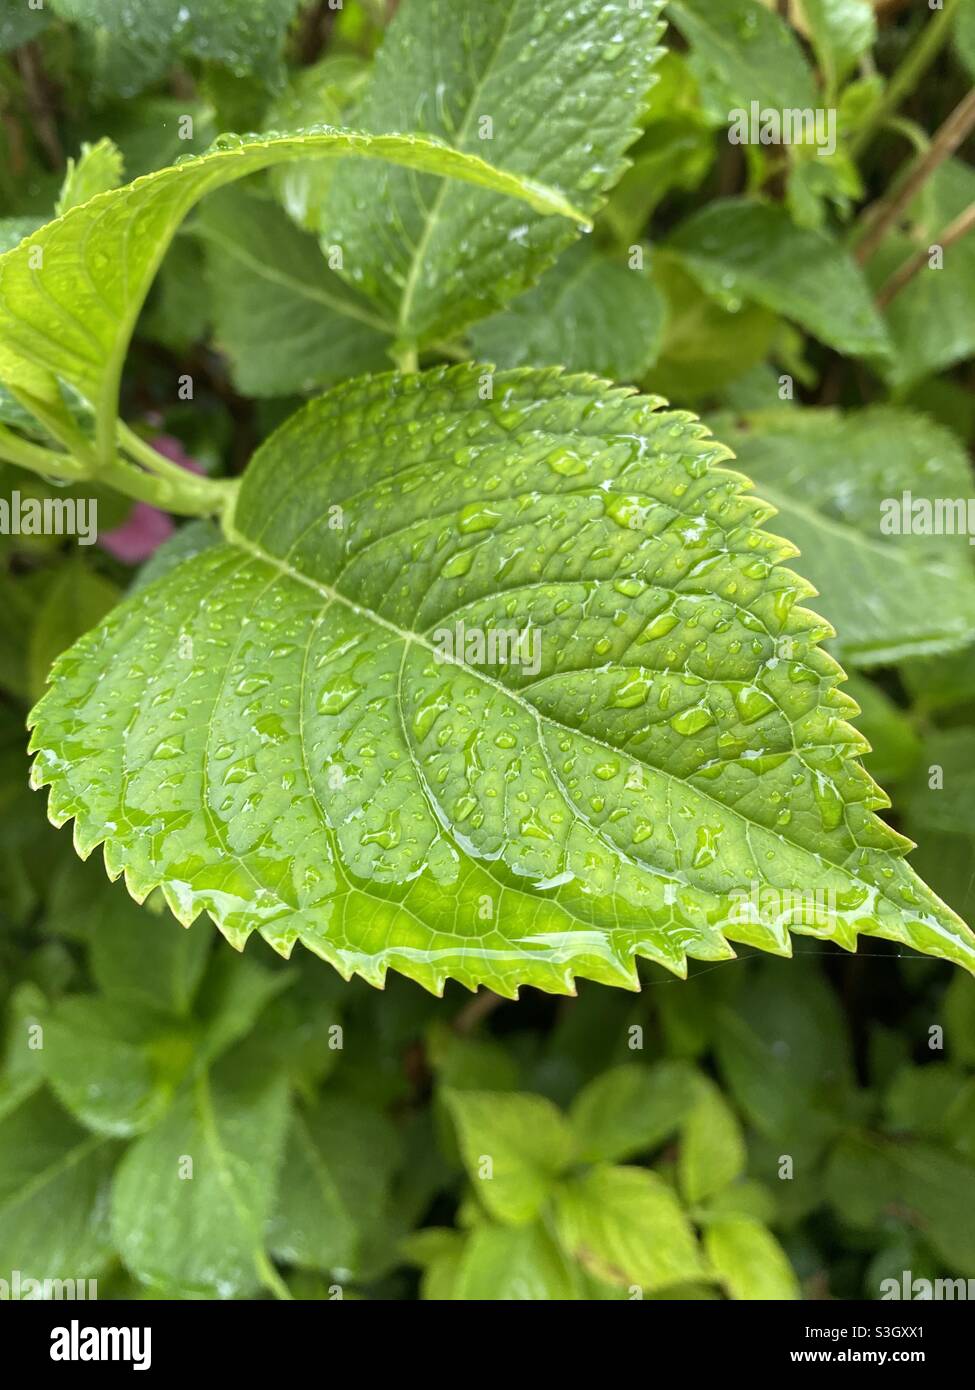 Rain drops on a green leaf nature photography Stock Photo